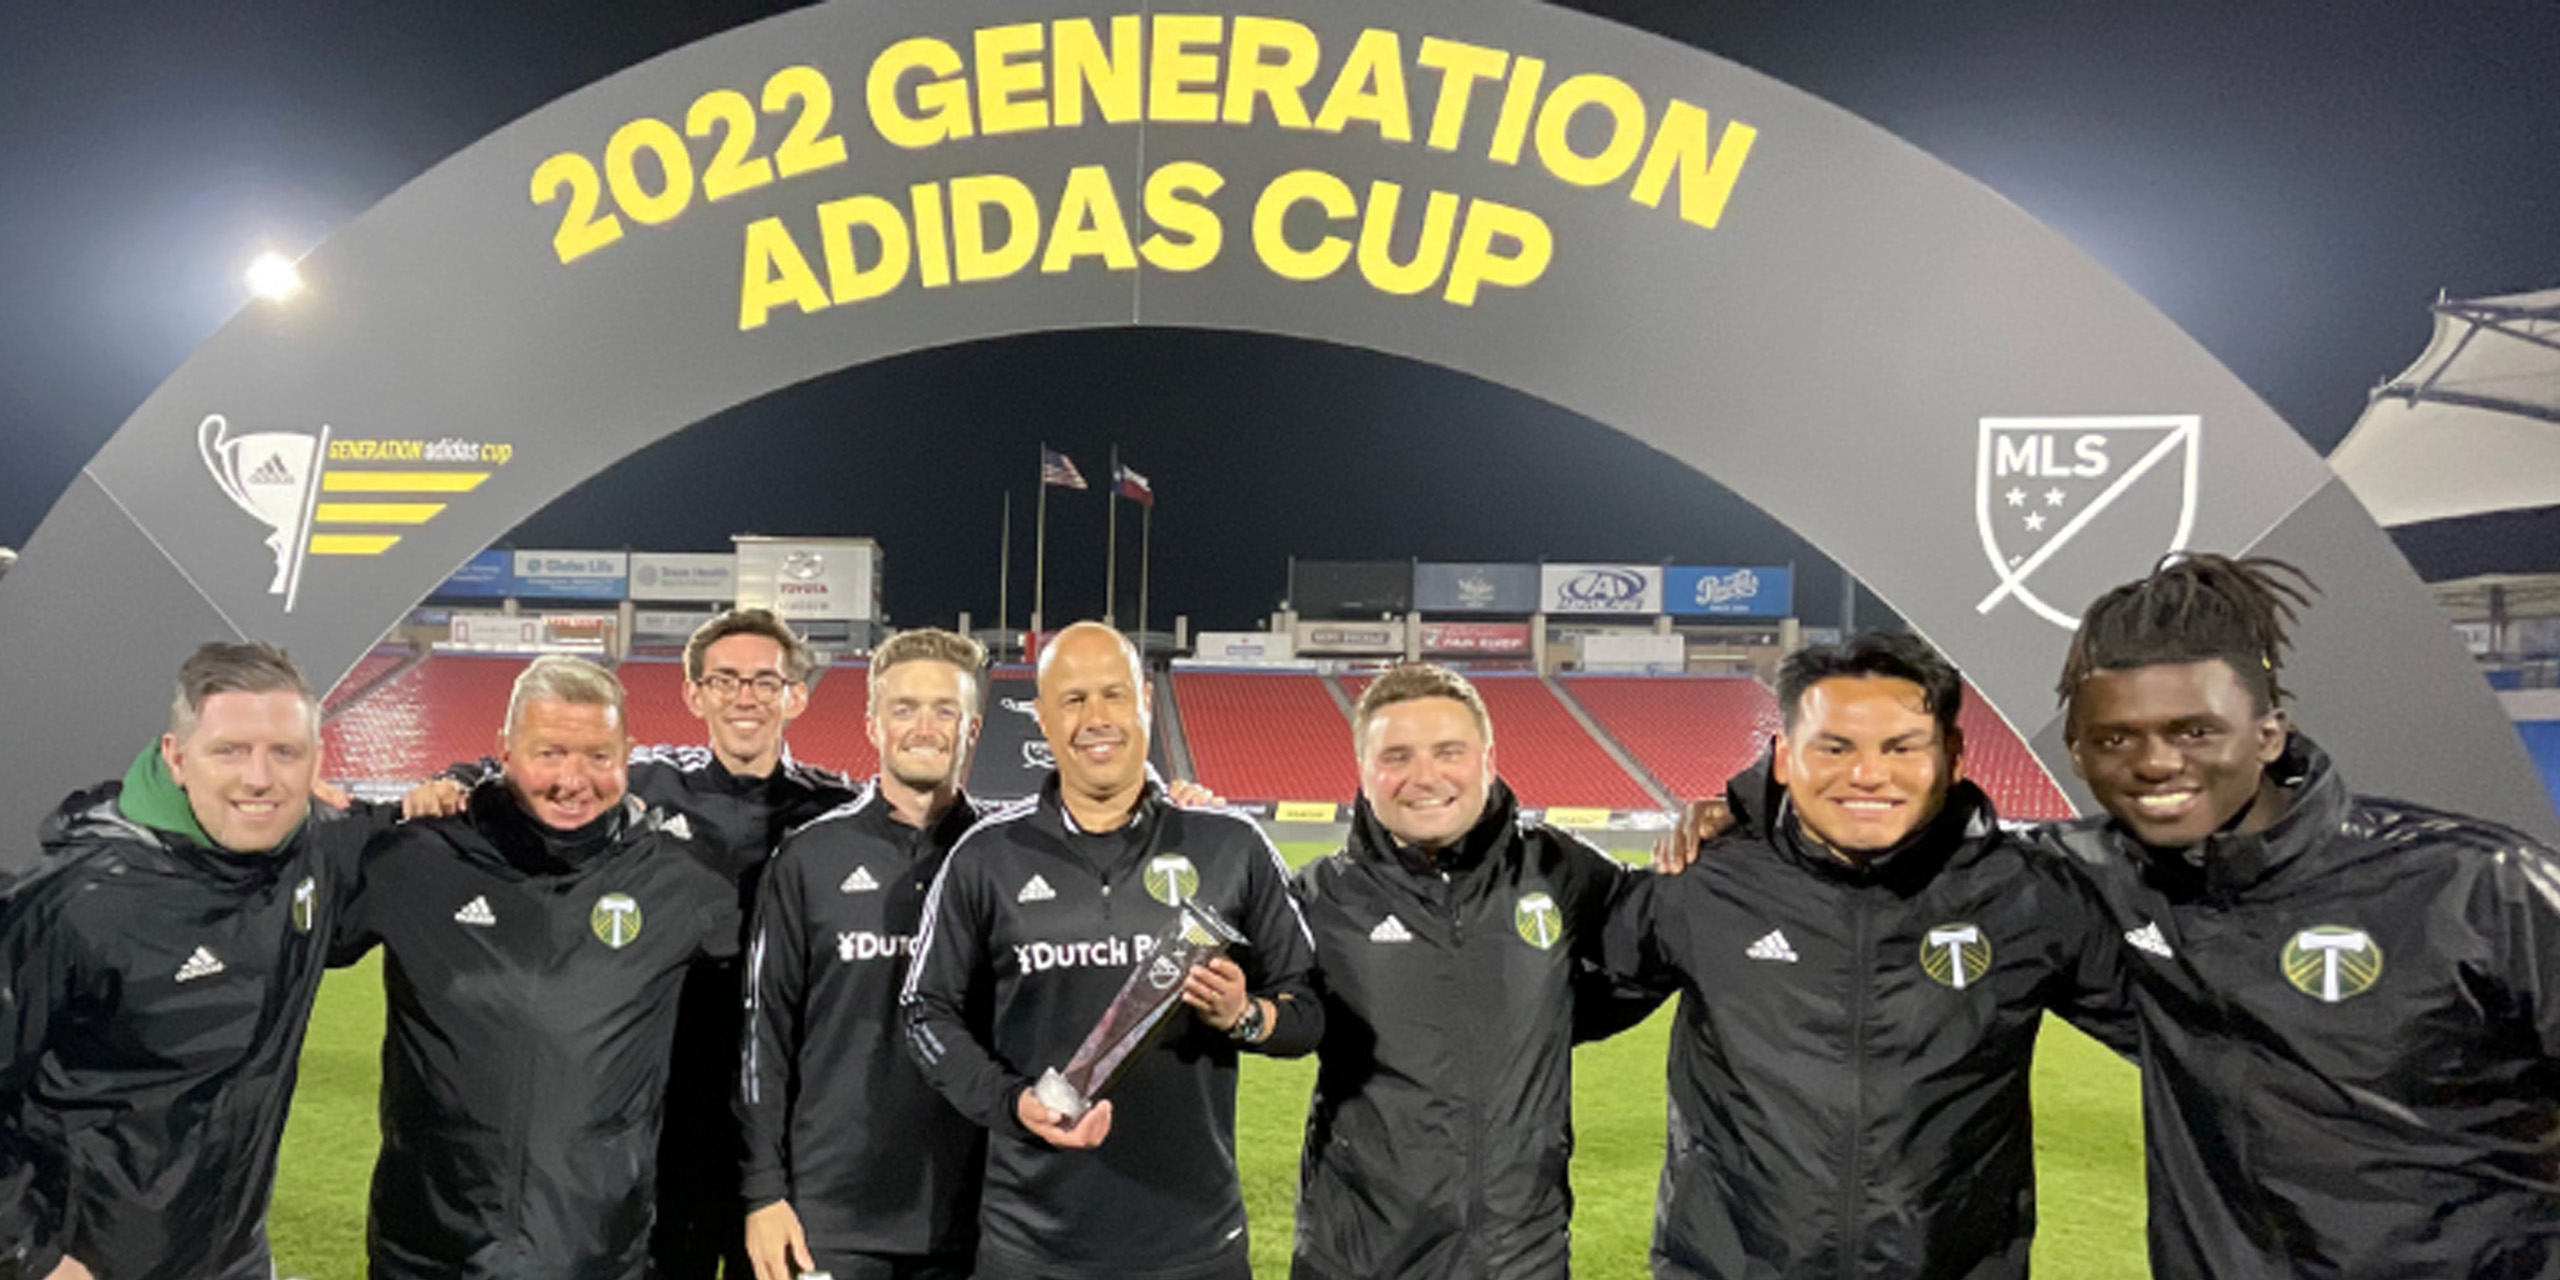 Loras students posing at the 2022 Generation Adidas Cup race.